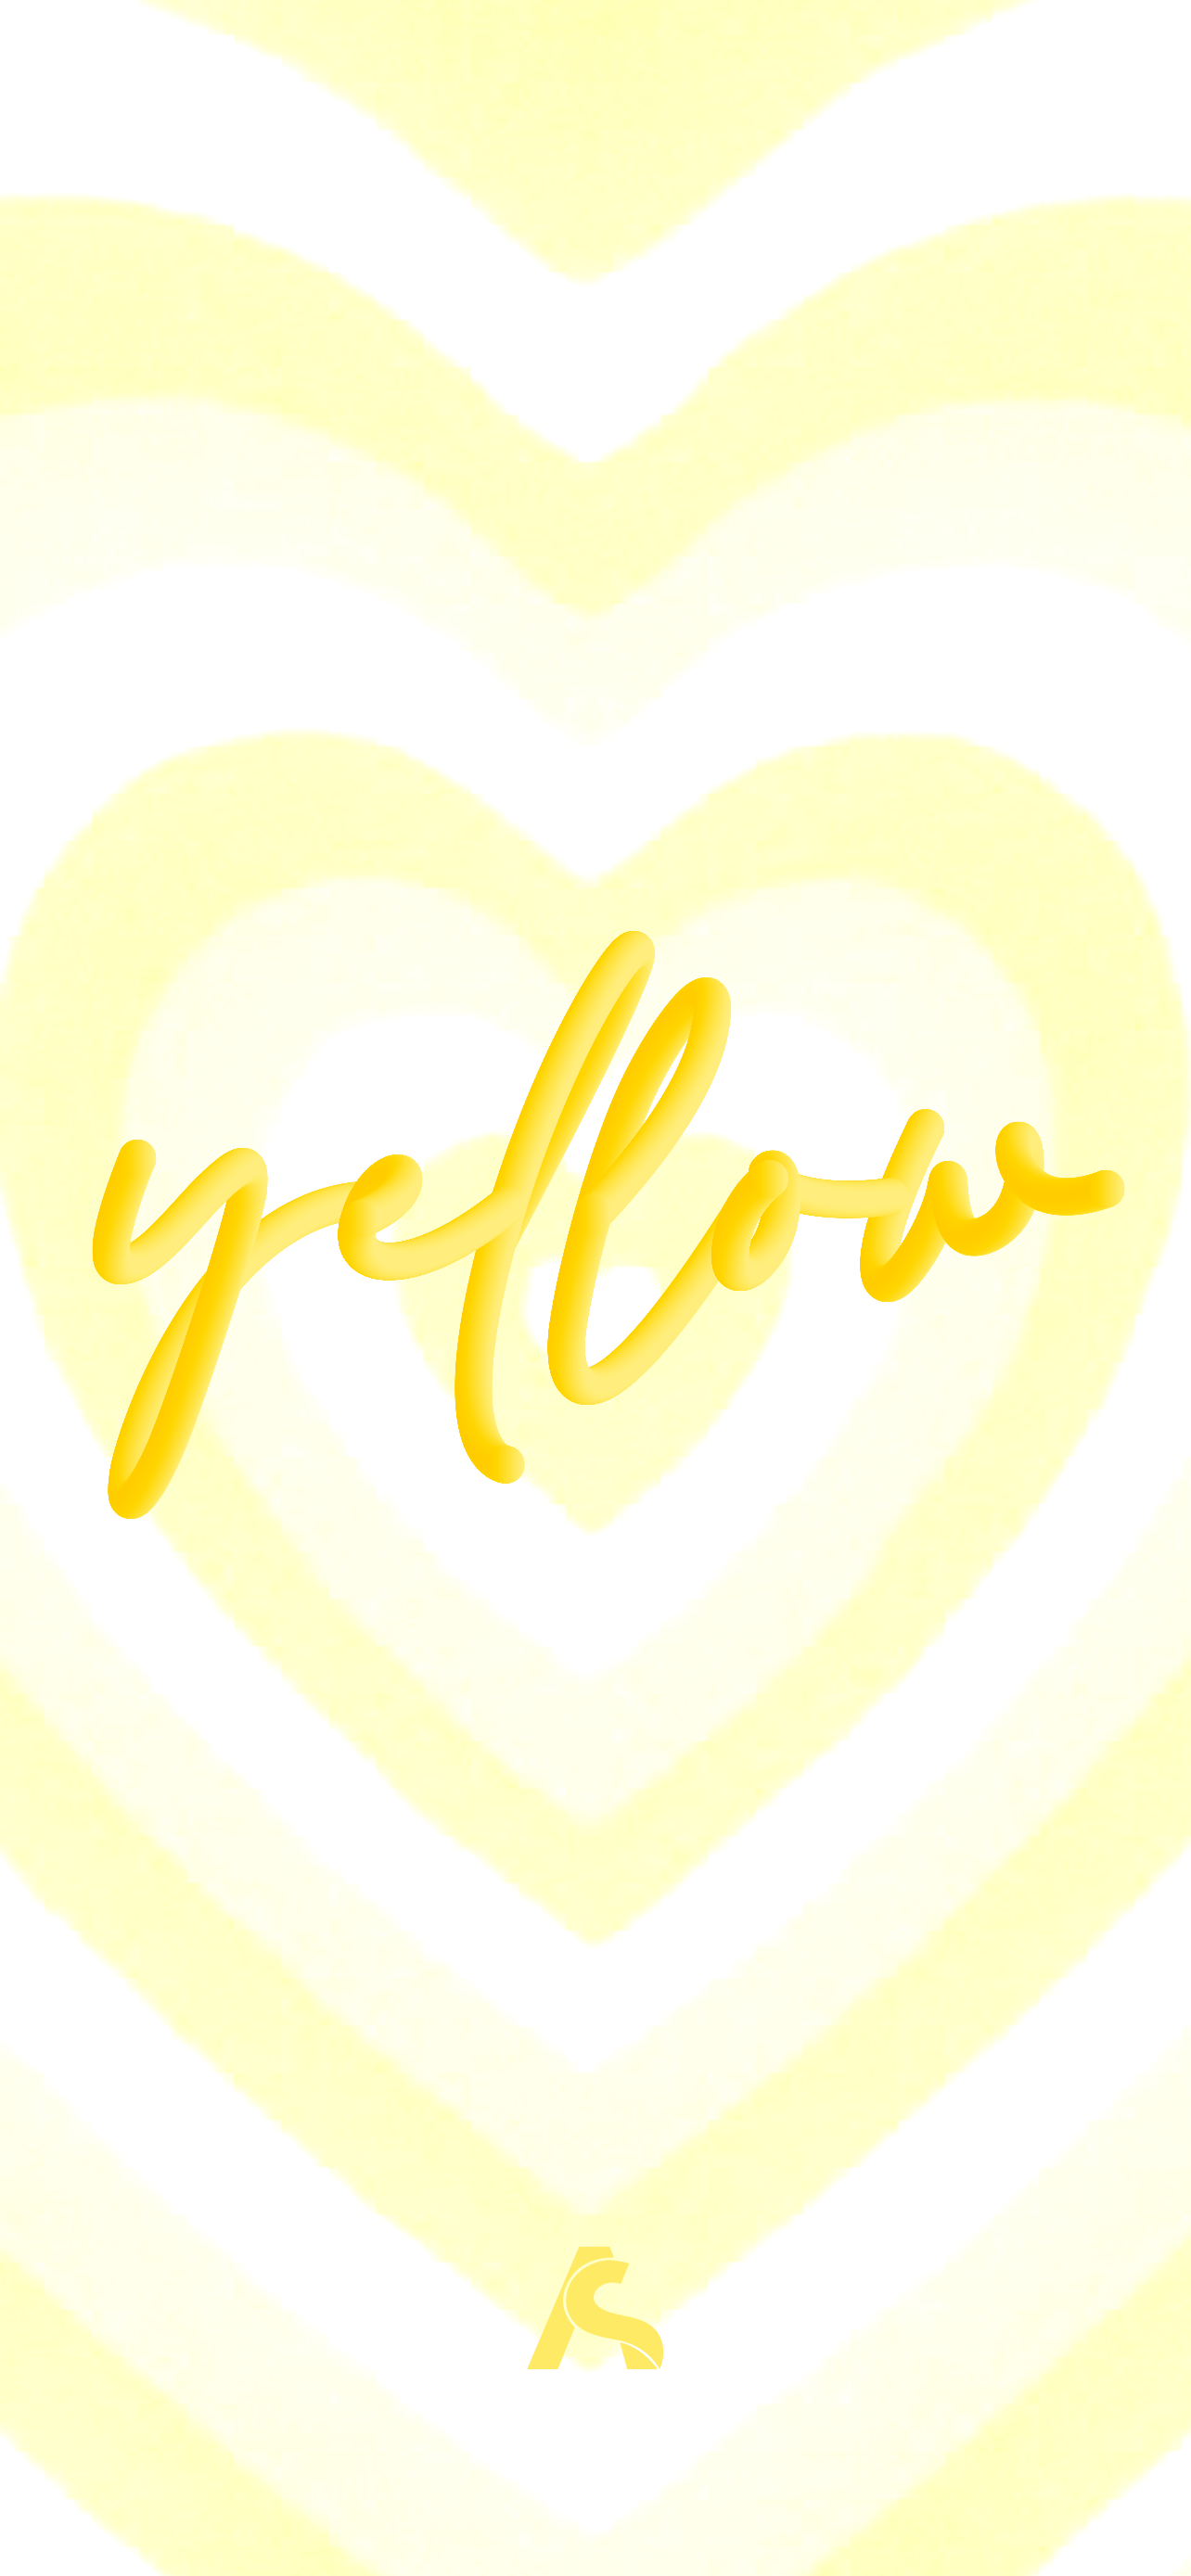 Free and customizable yellow background templates